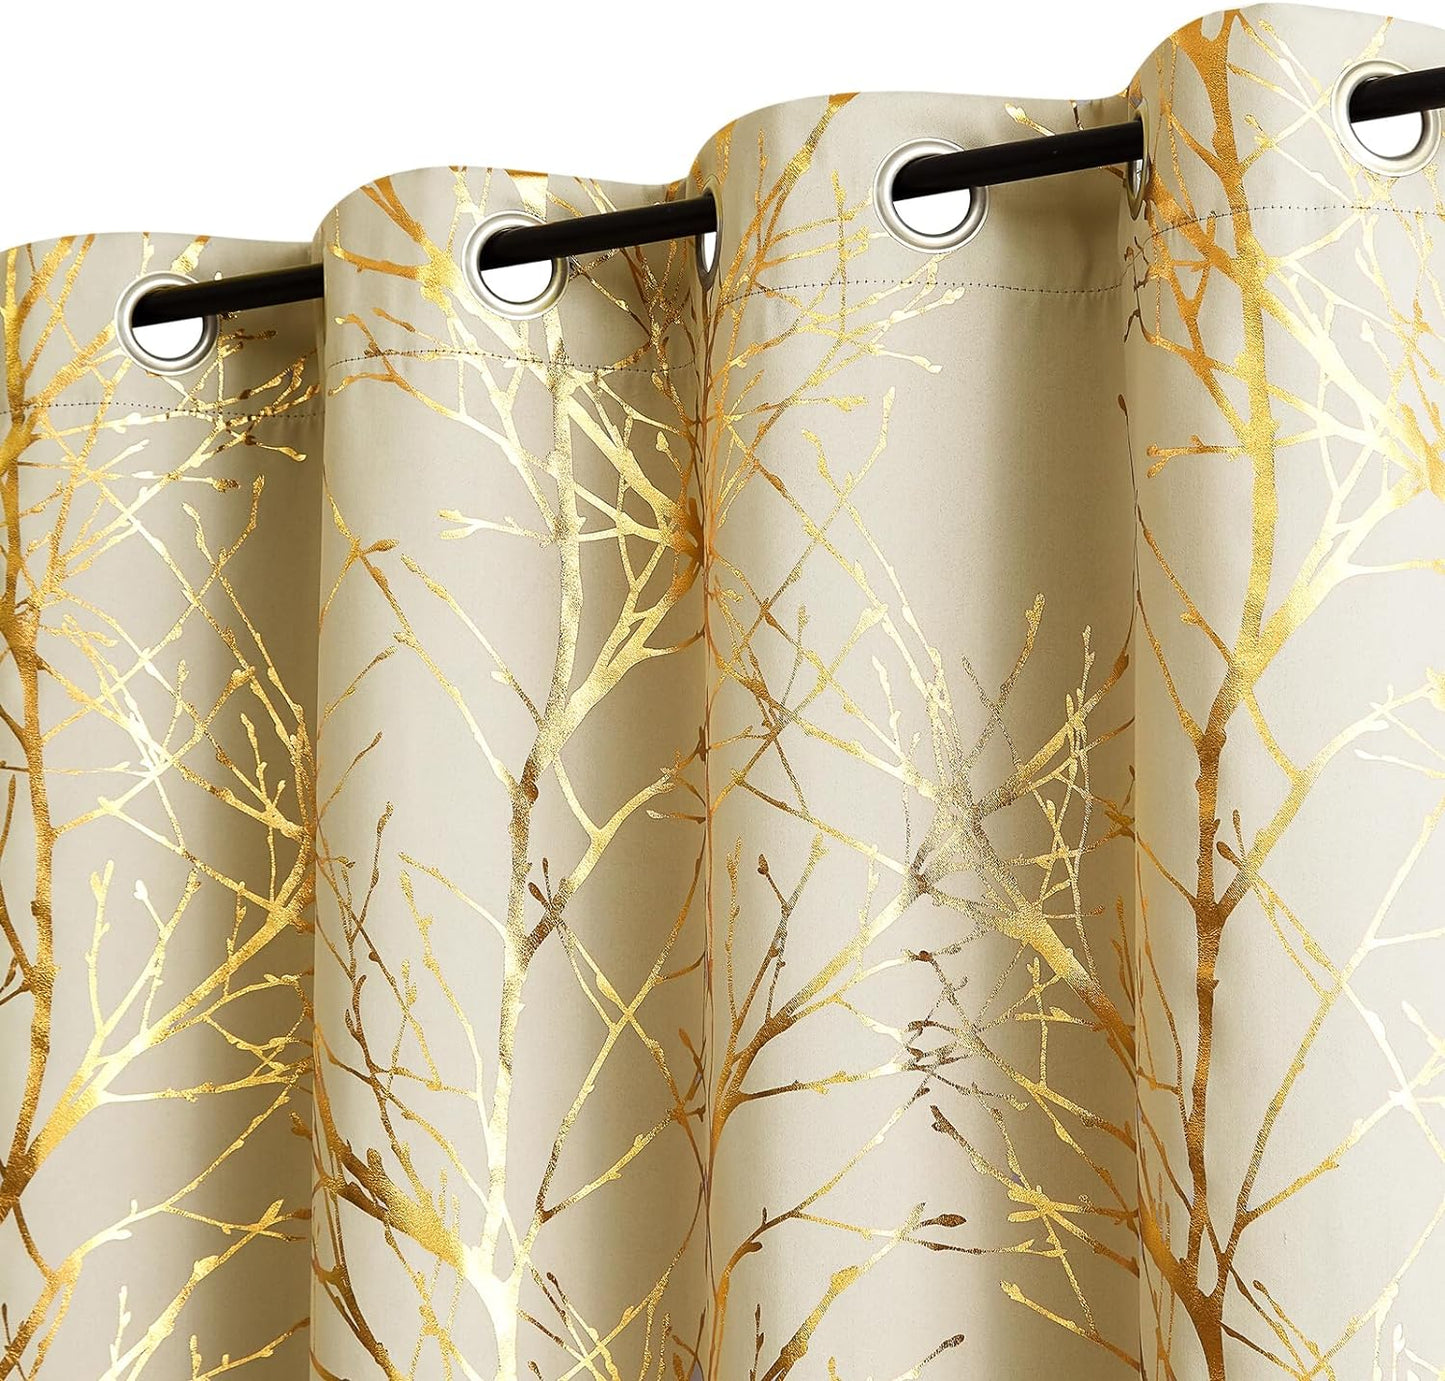 FMFUNCTEX Metallic Tree Blackout Curtains Bedroom Grey 84-Inch Living-Room Branch Print Curtain Panels Forest Triple Weave Thermal Insulated Drapes for Windows Dorm Hotel Grommet Top, 2Panels  Fmfunctex Gold /Ivory 50"W X 84"L 2Pcs 